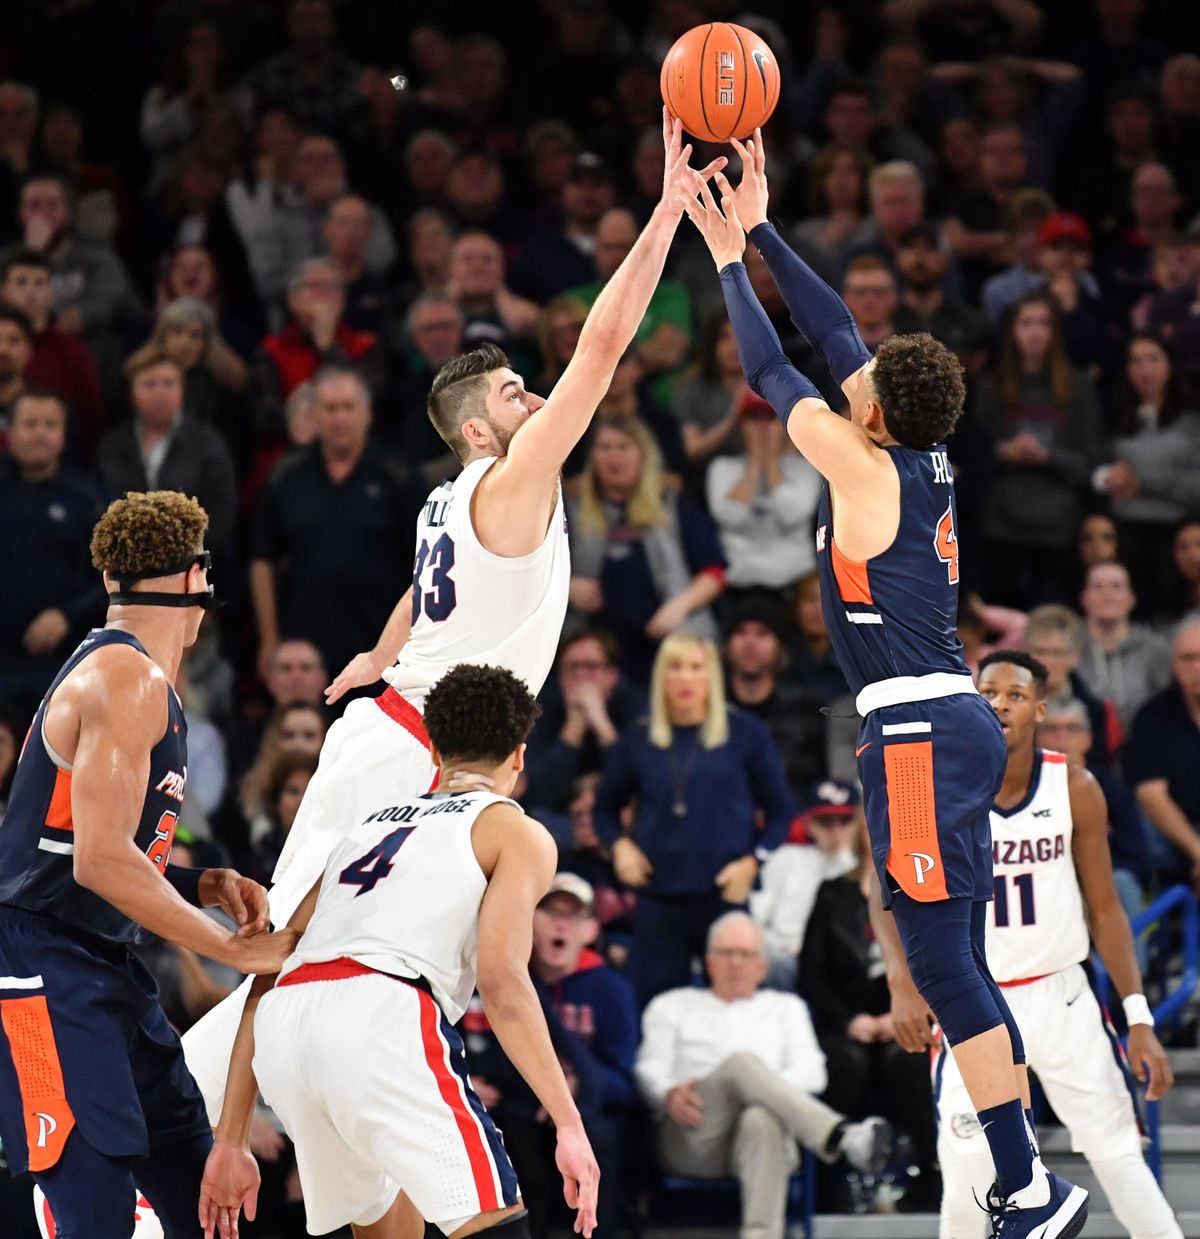 Gonzaga’s Killian Tillie blocks Pepperdine guard Colbey Ross’ potential game-tying shot late in the second half of the Zags’ 75-70 home win in January 2020.  (Tyler Tjomsland/The Spokesman-Review)